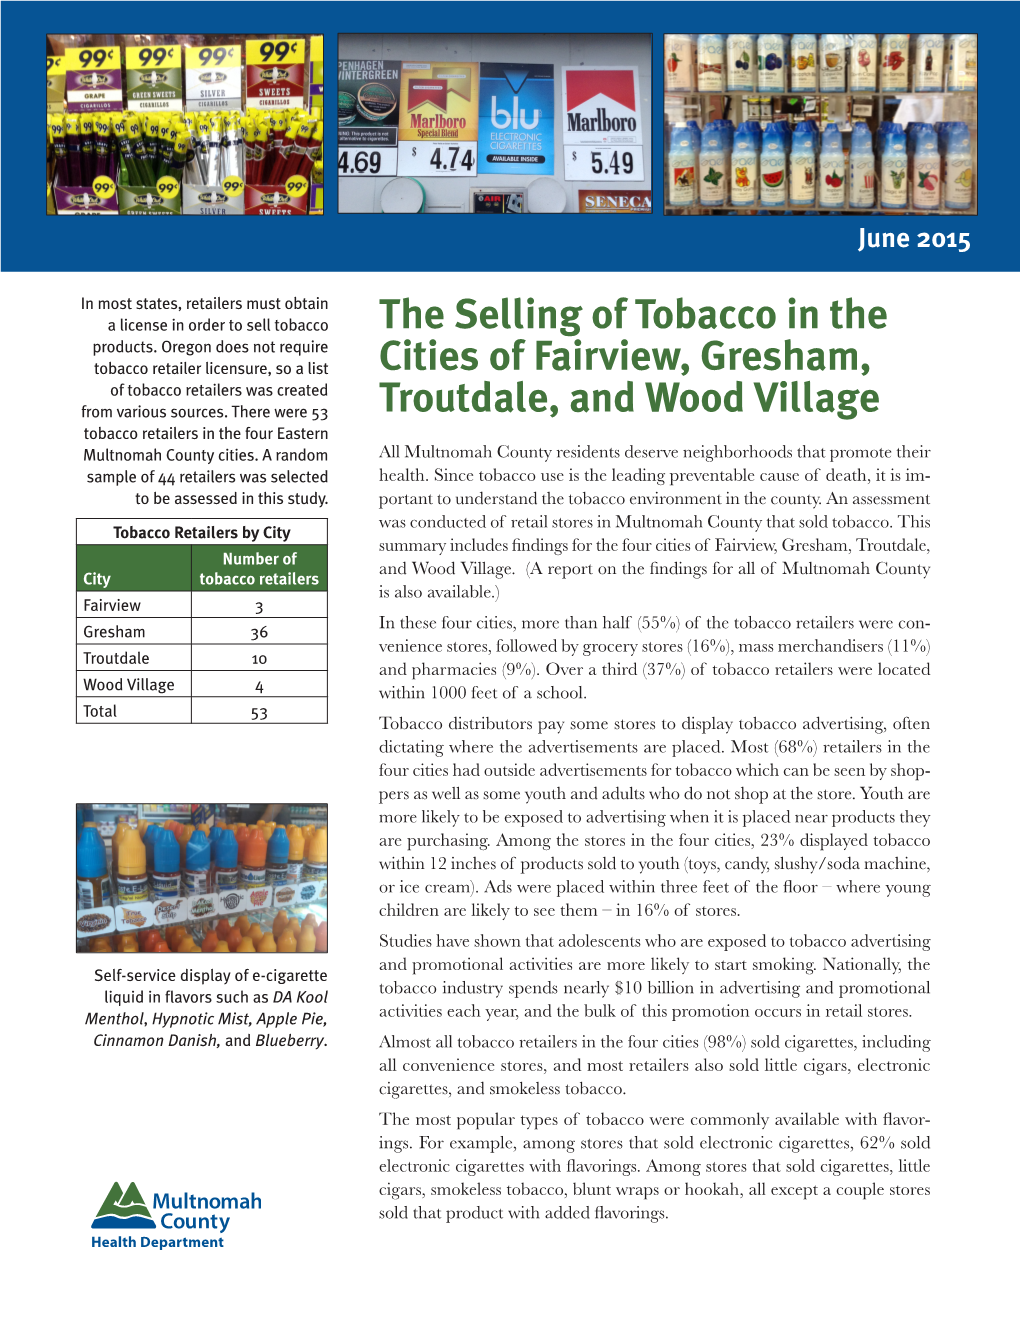 The Selling of Tobacco in the Cities of Fairview, Gresham, Troutdale, And